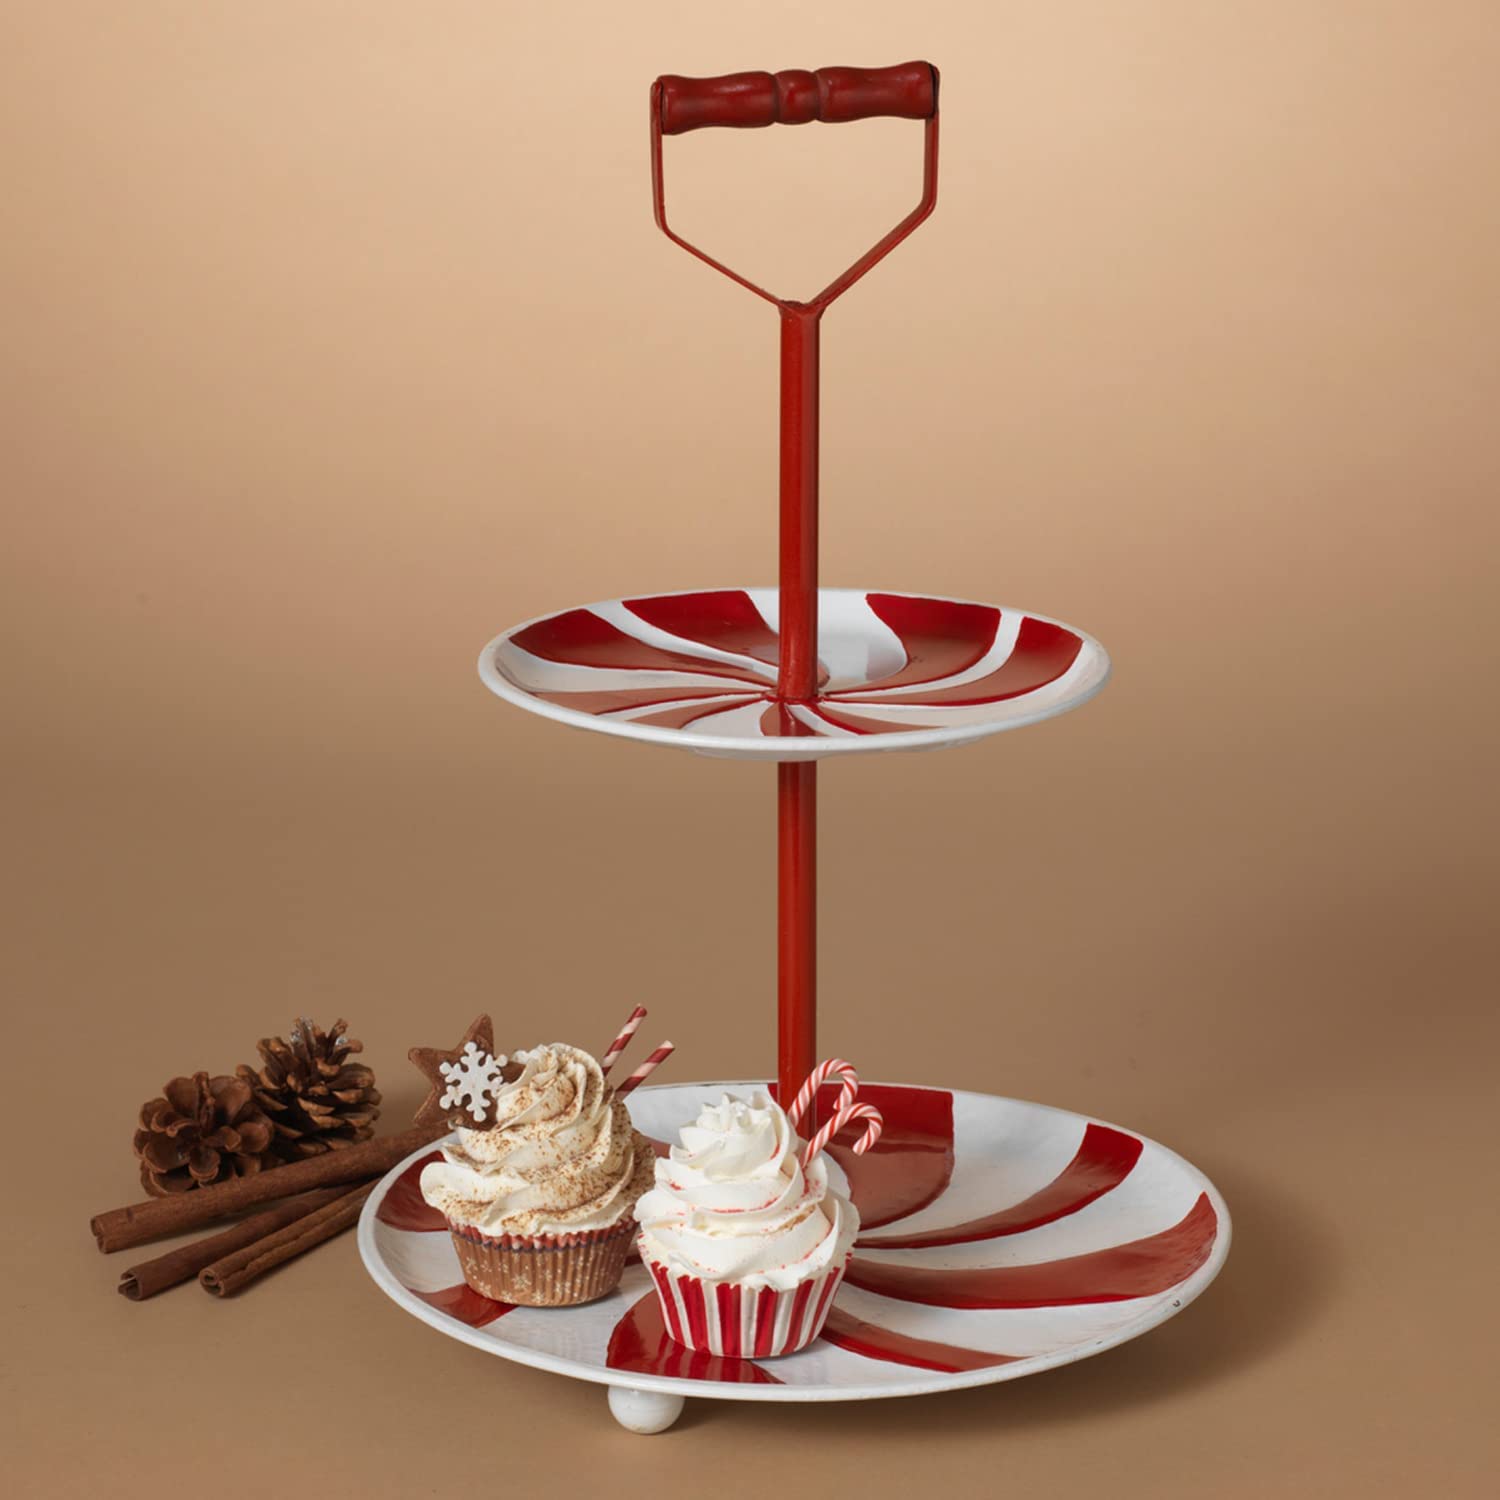 17-Inch Metal Two Tiered Red & White Candy Cane Christmas Serving Tray -  One Holiday Way